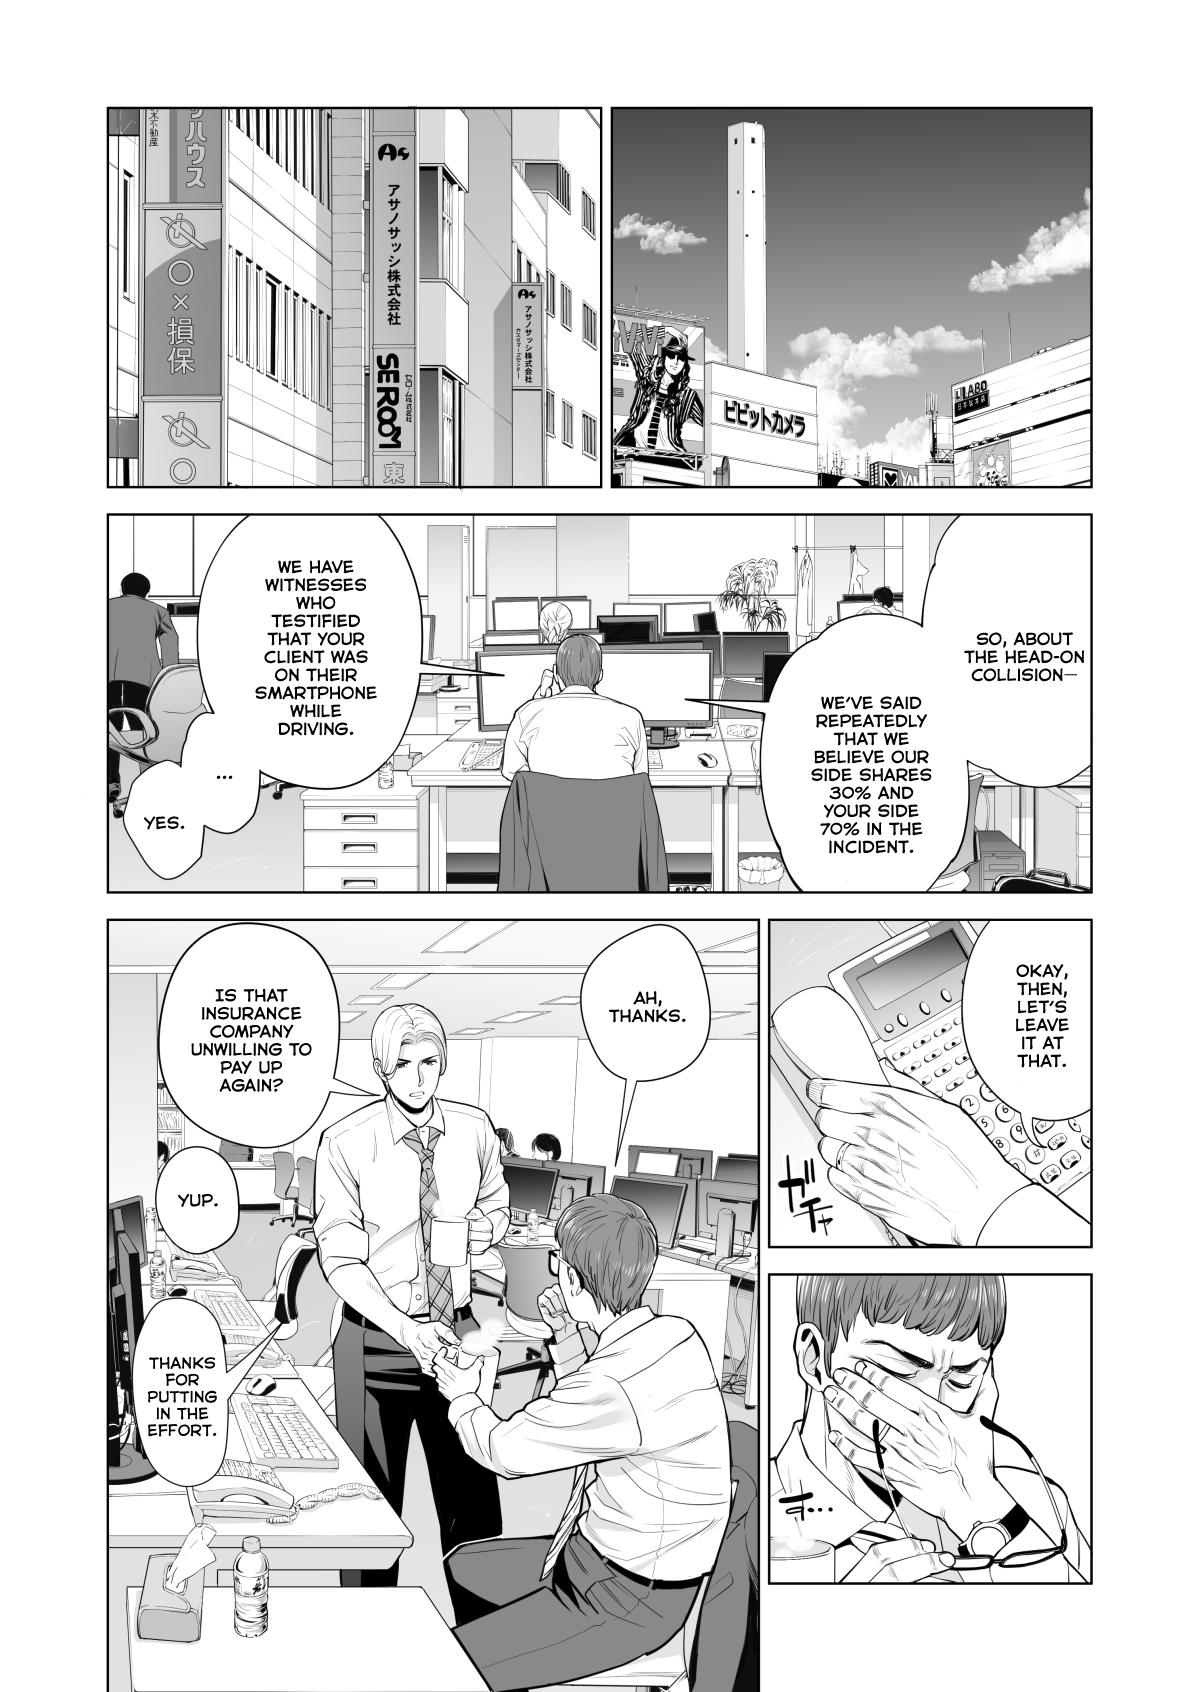 [HGT Lab (Tsusauto)] Tsukiyo no Midare Zake (Zenpen) Moonlit Intoxication ~ A Housewife Stolen by a Coworker Besides her Blackout Drunk Husband ~ Chapter 1 [English] 8